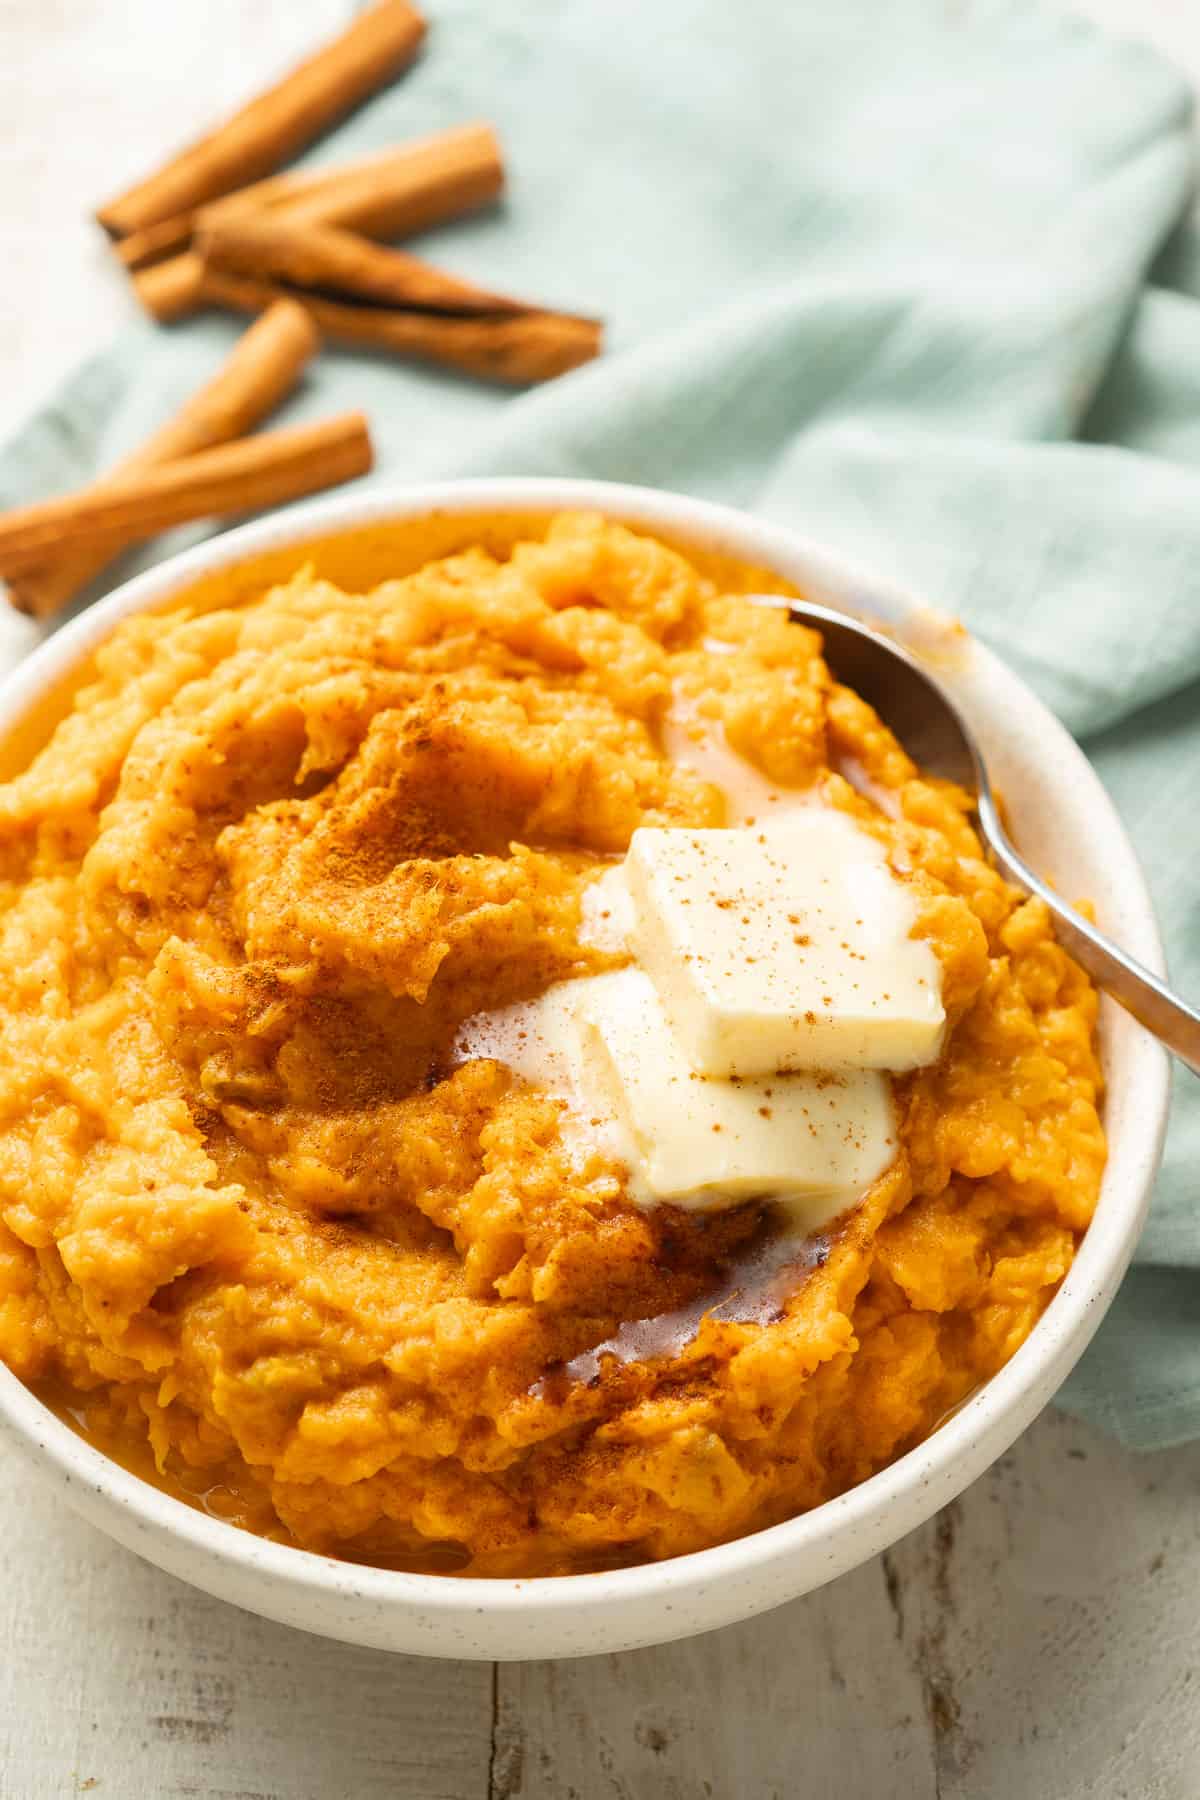 Bowl of Vegan Mashed Sweet Potatoes with cinnamon sticks in the background.